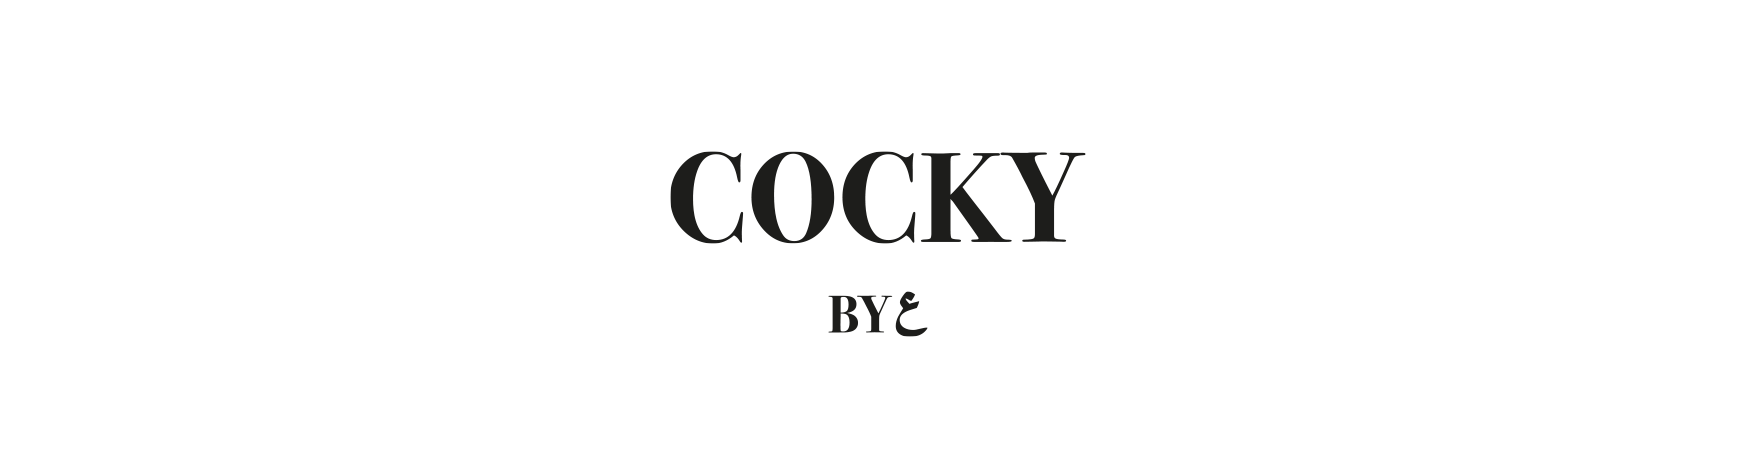 COCKY BY ع